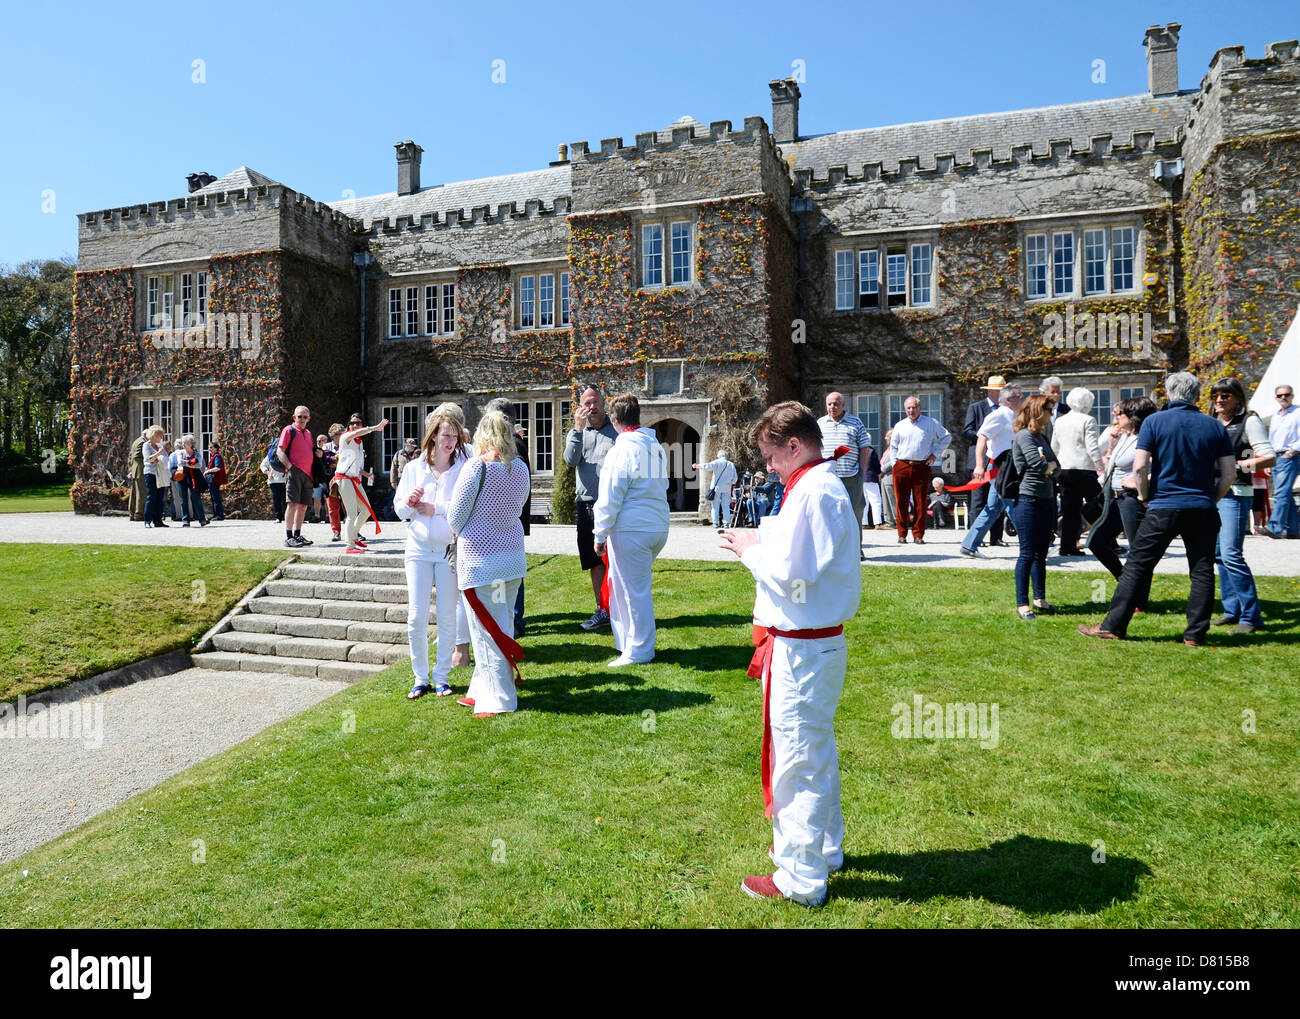 Obby Oss day at Prideaux Place in Padstow, Cornwall, all of the townsfolk are invited to rest on the lawns during the parade. Stock Photo